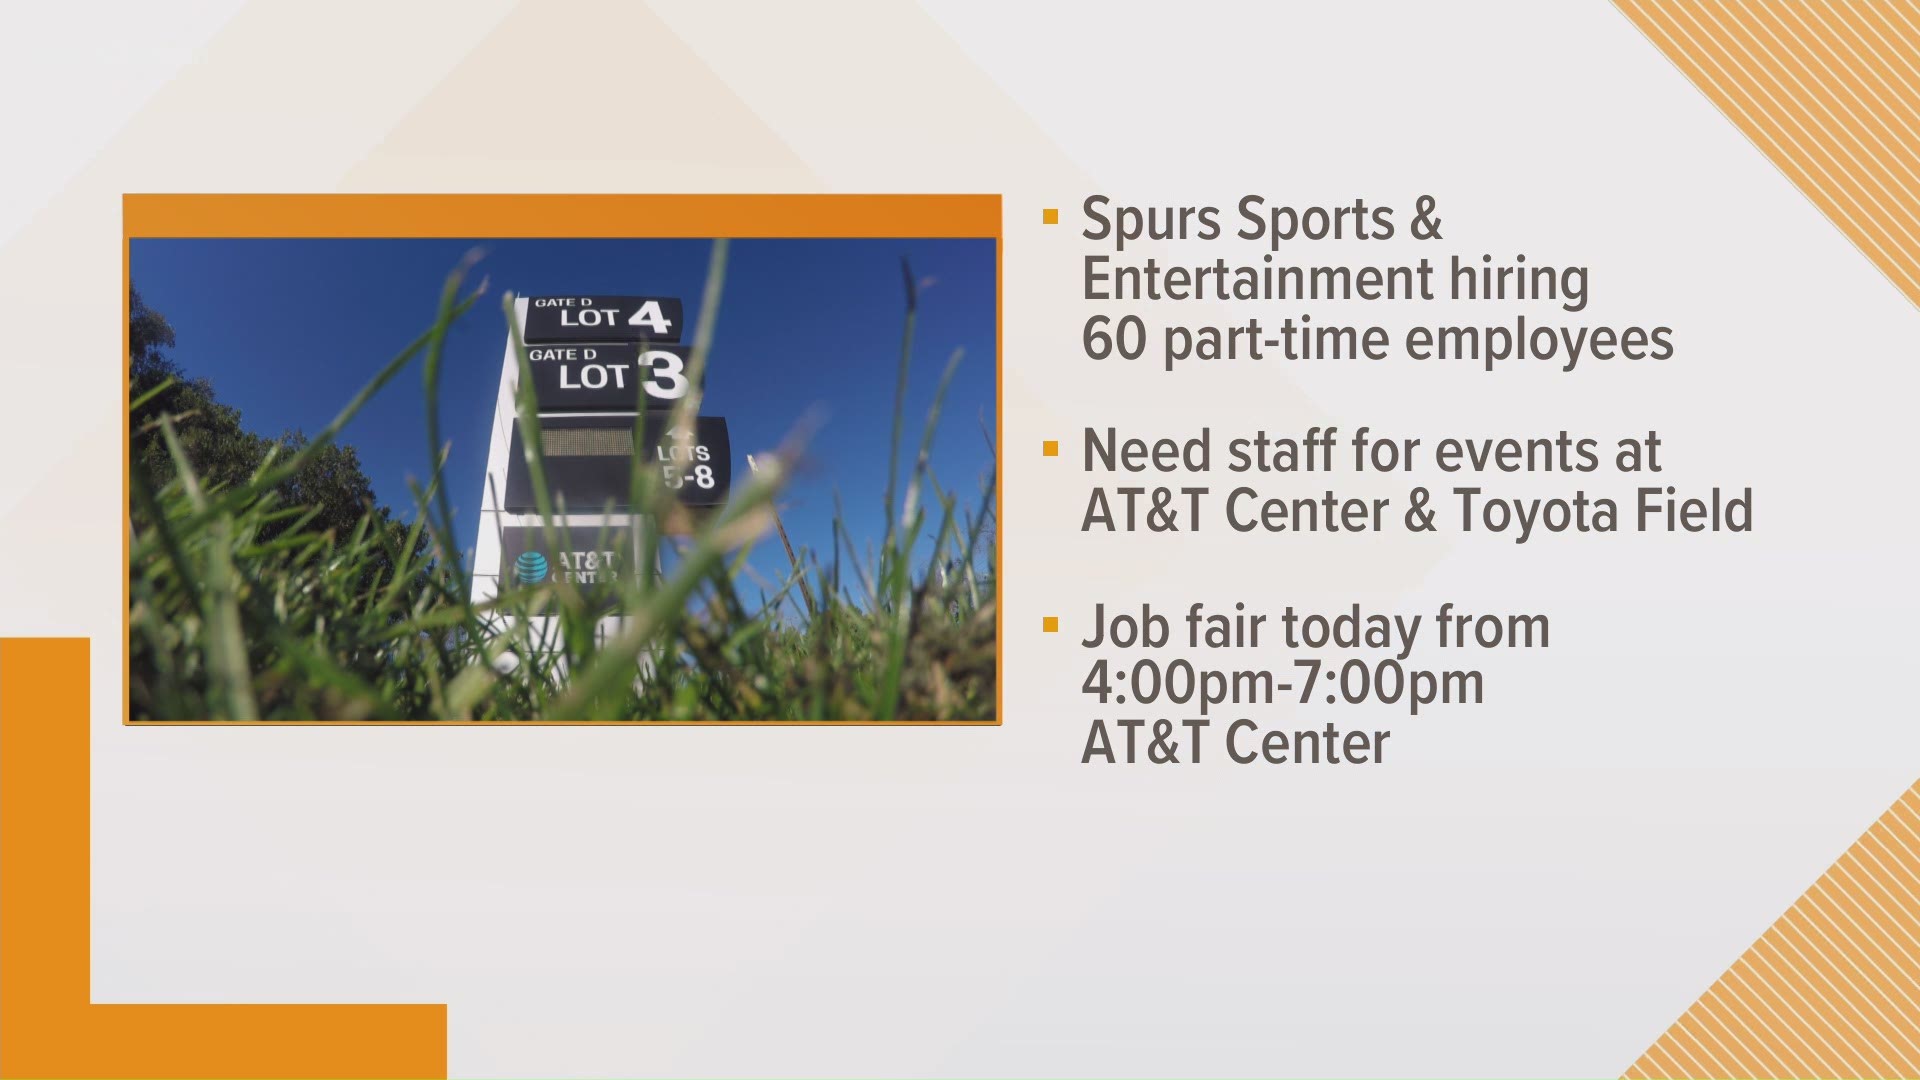 The job fair runs from 4 to 7 p.m. on July 28 at the AT&T Center.